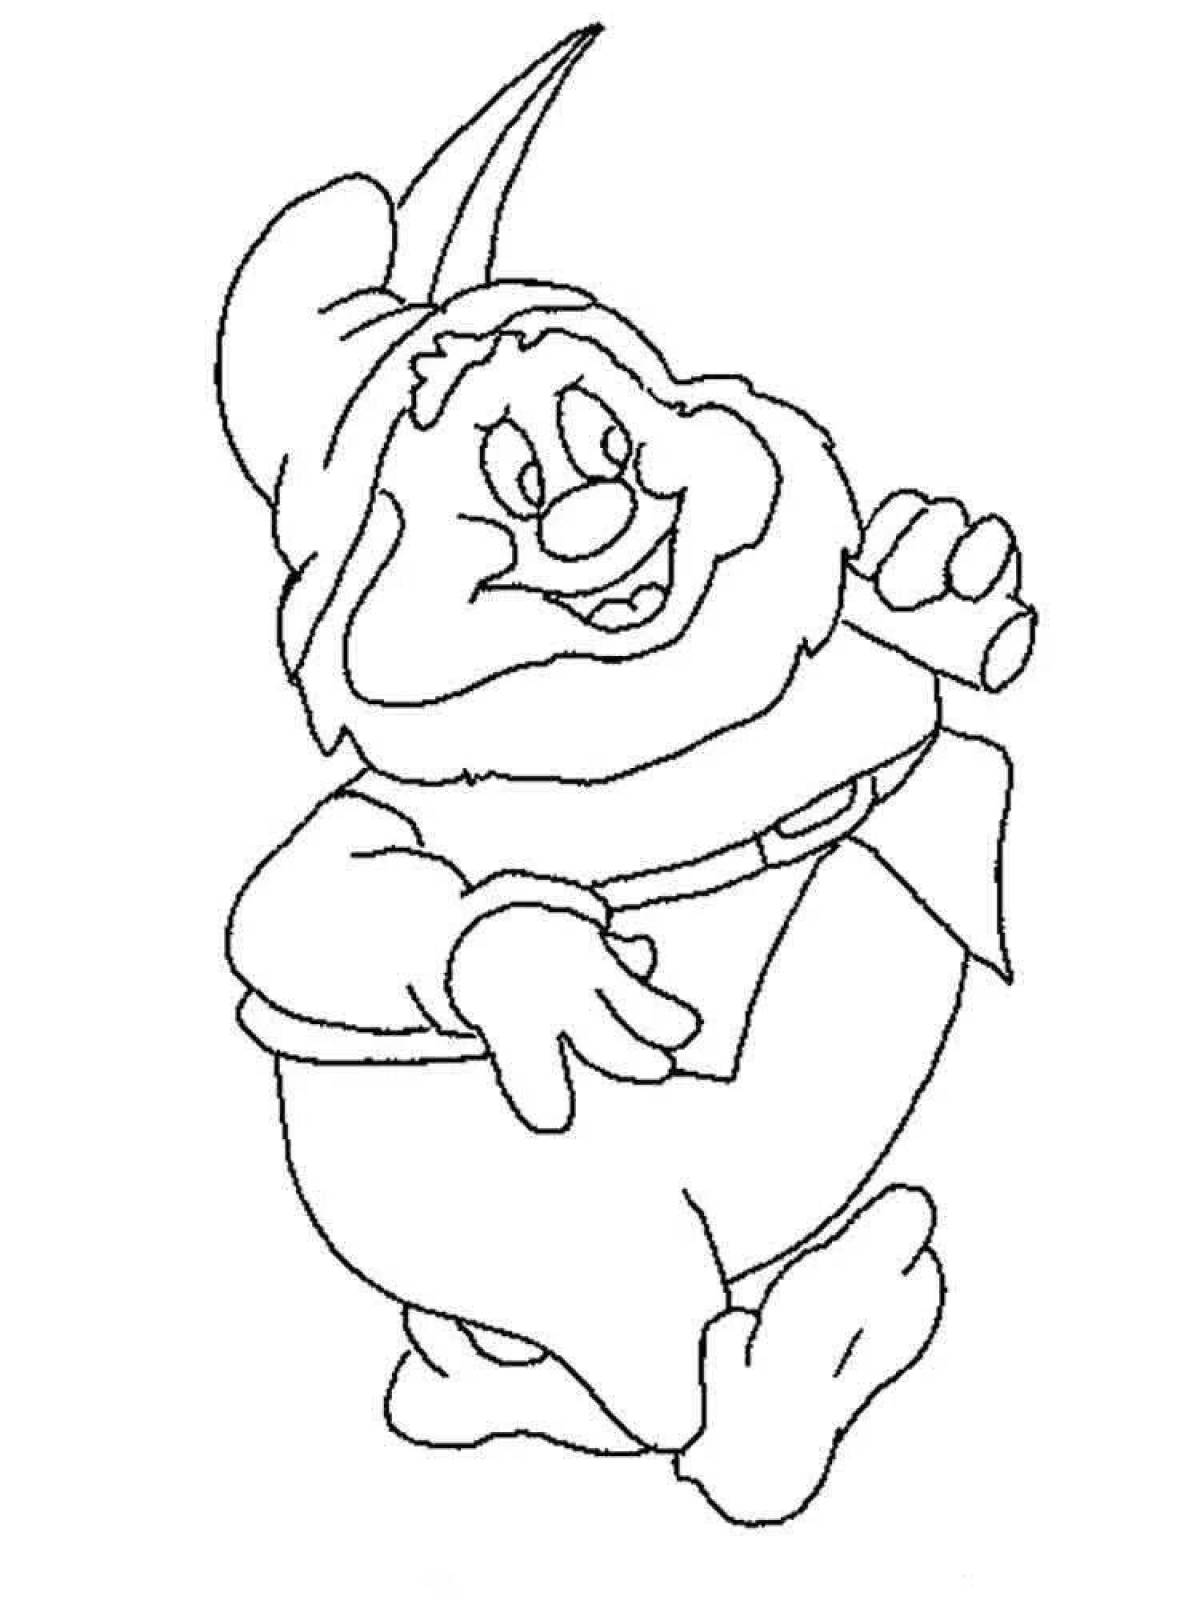 Great gnome coloring page